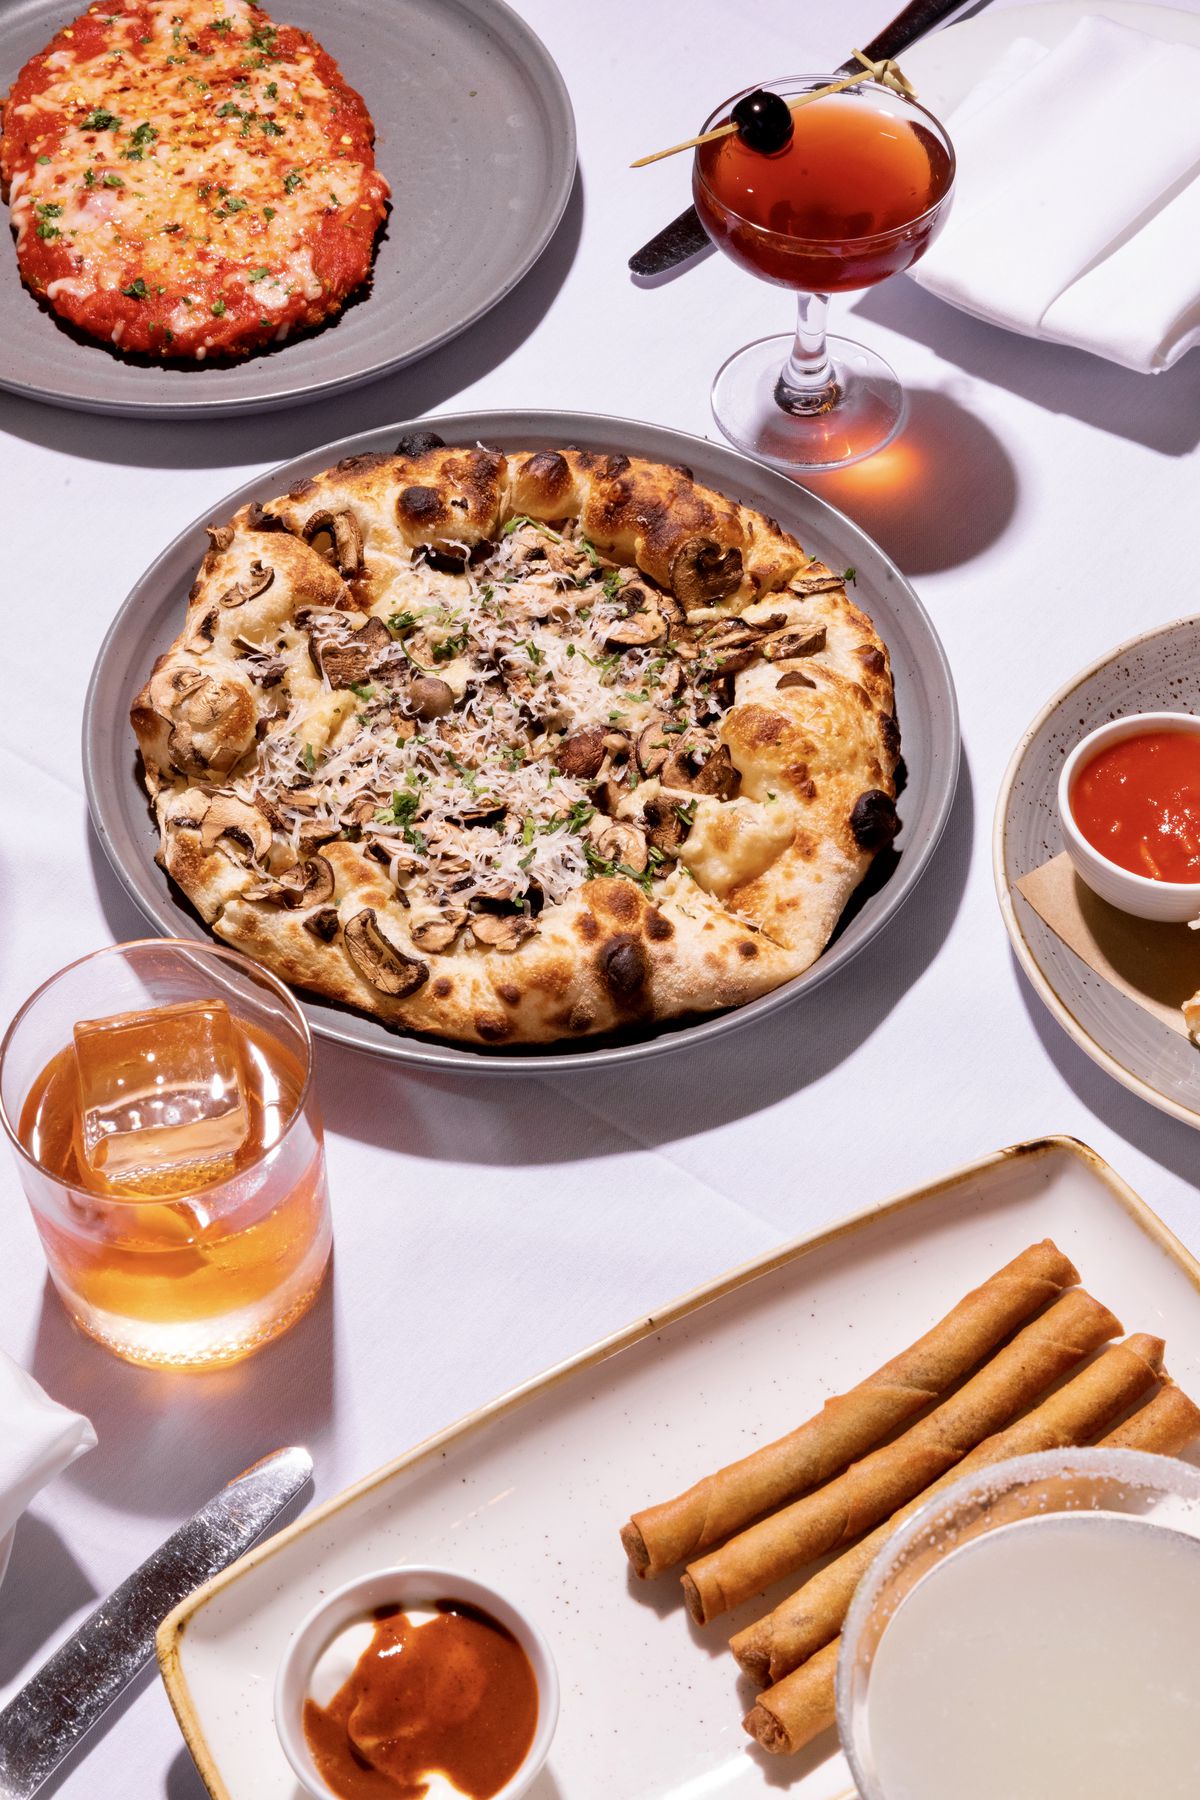 A full pizza, two side dishes and cocktails.